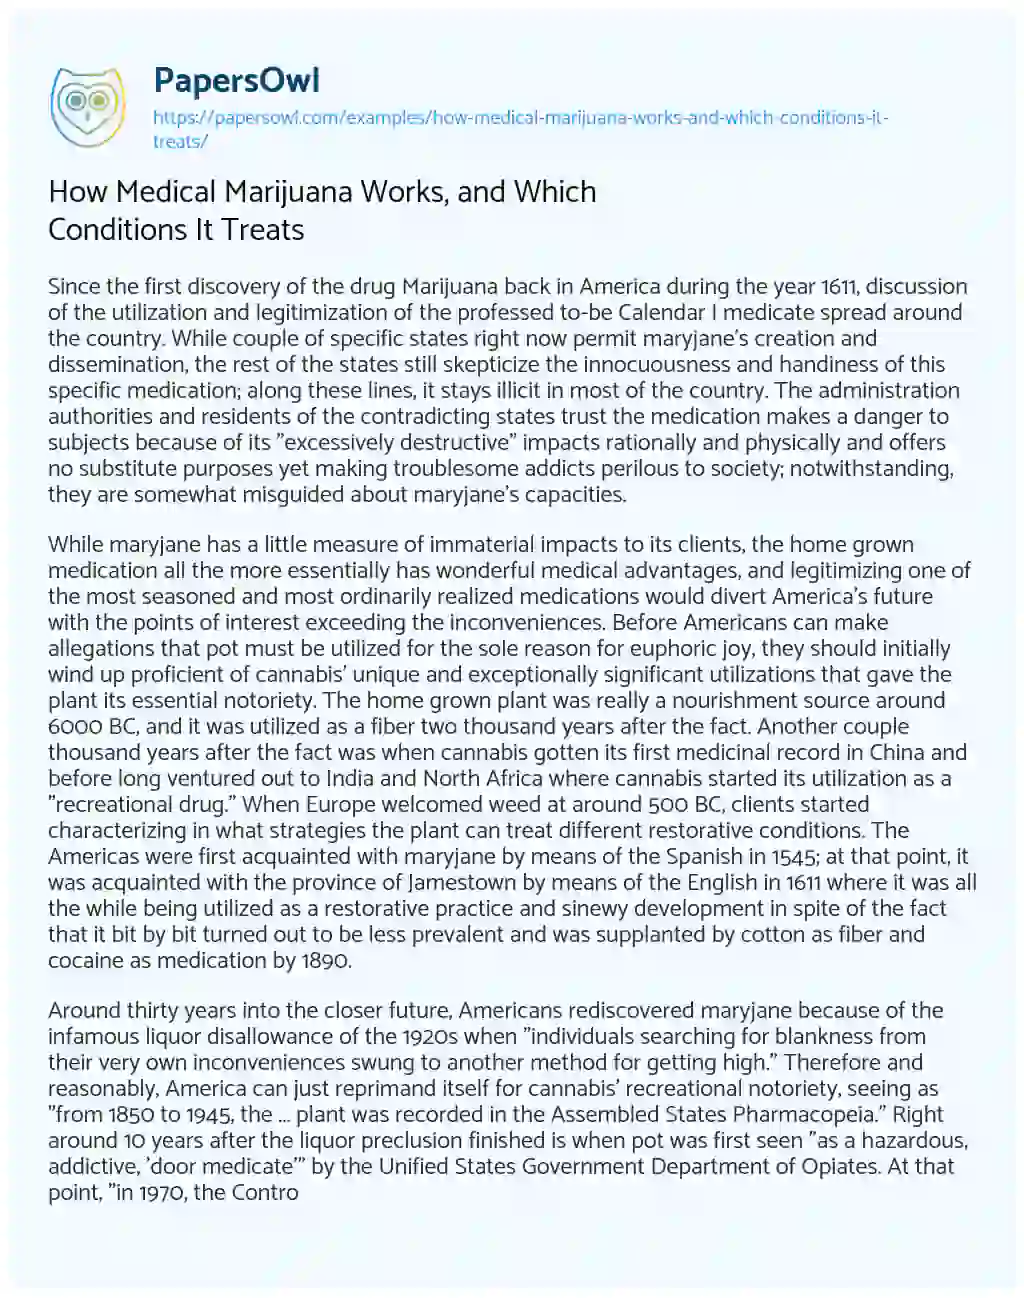 Essay on How Medical Marijuana Works, and which Conditions it Treats